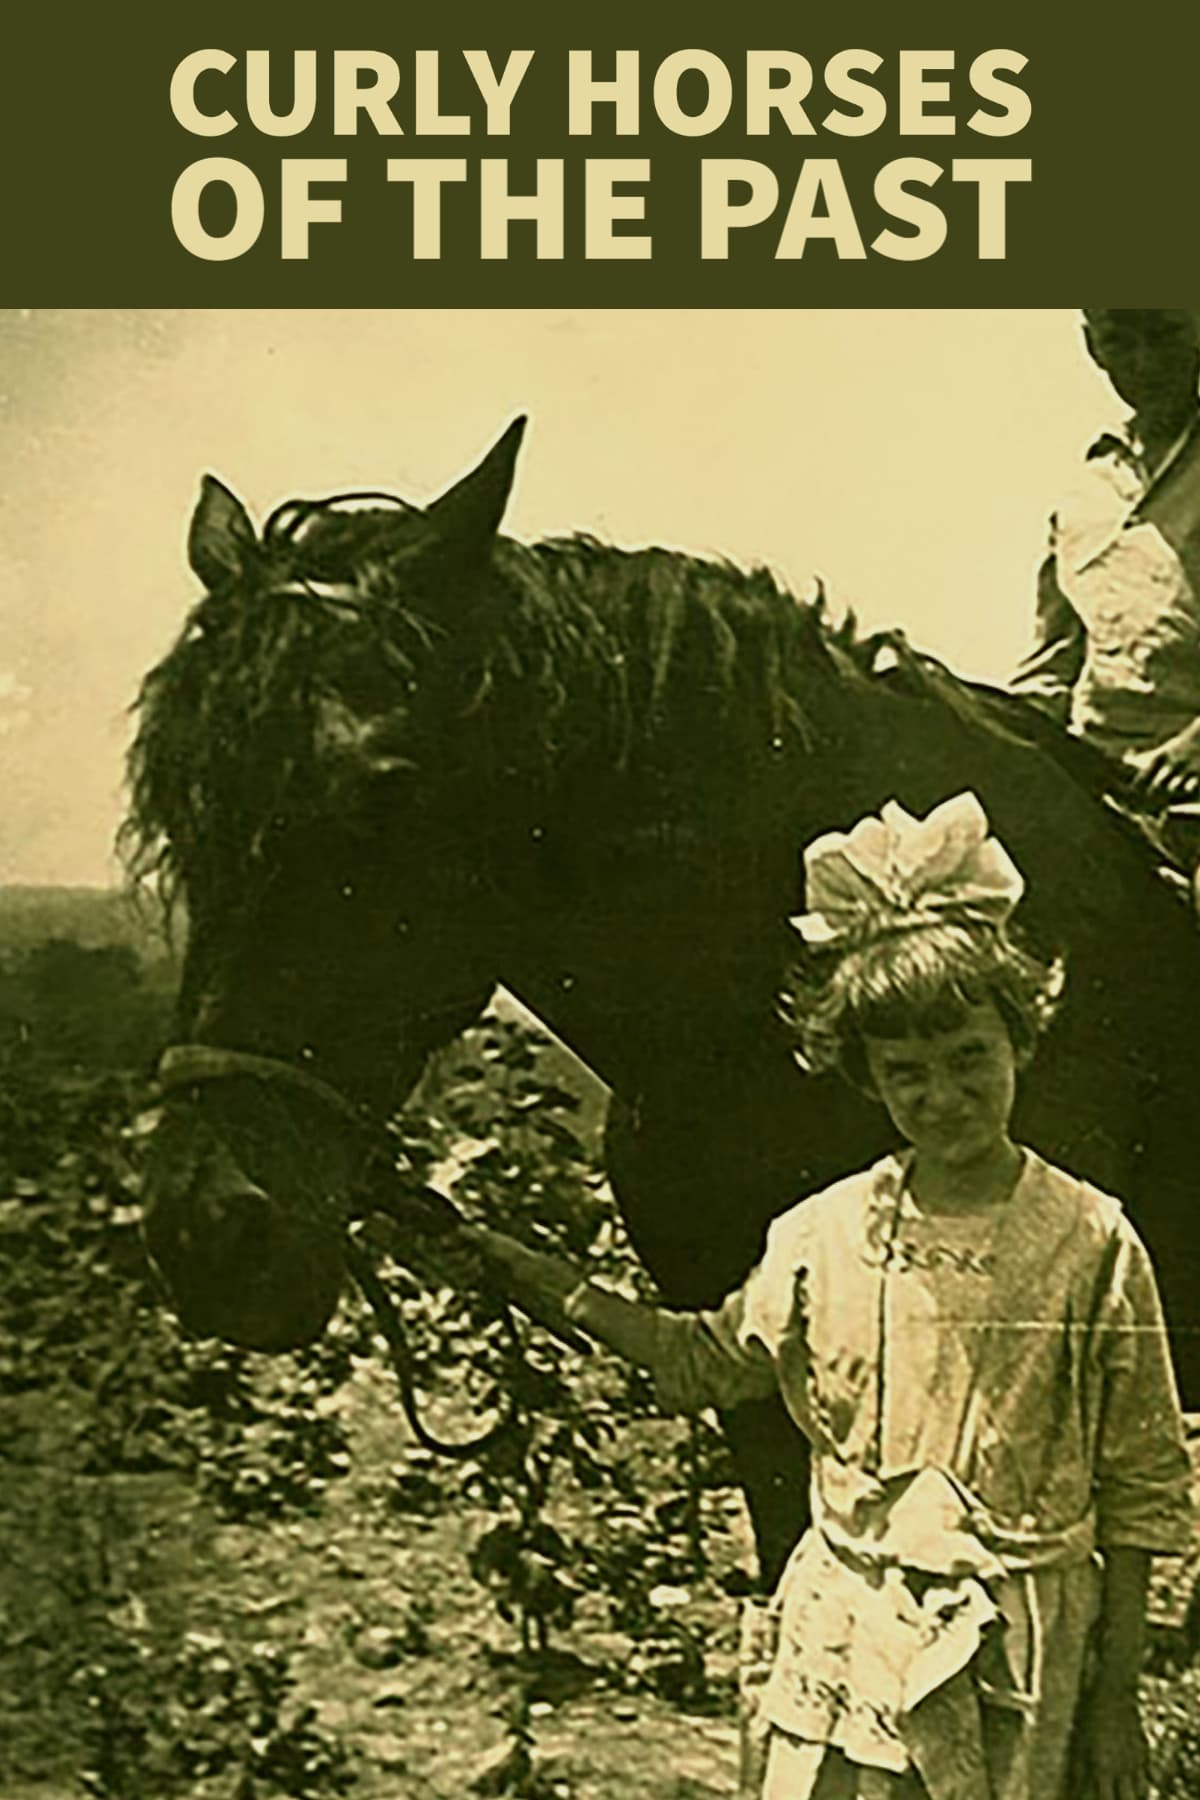 Curly horses are growing in popularity, but aren't a new breed. Explore the history of curly horses